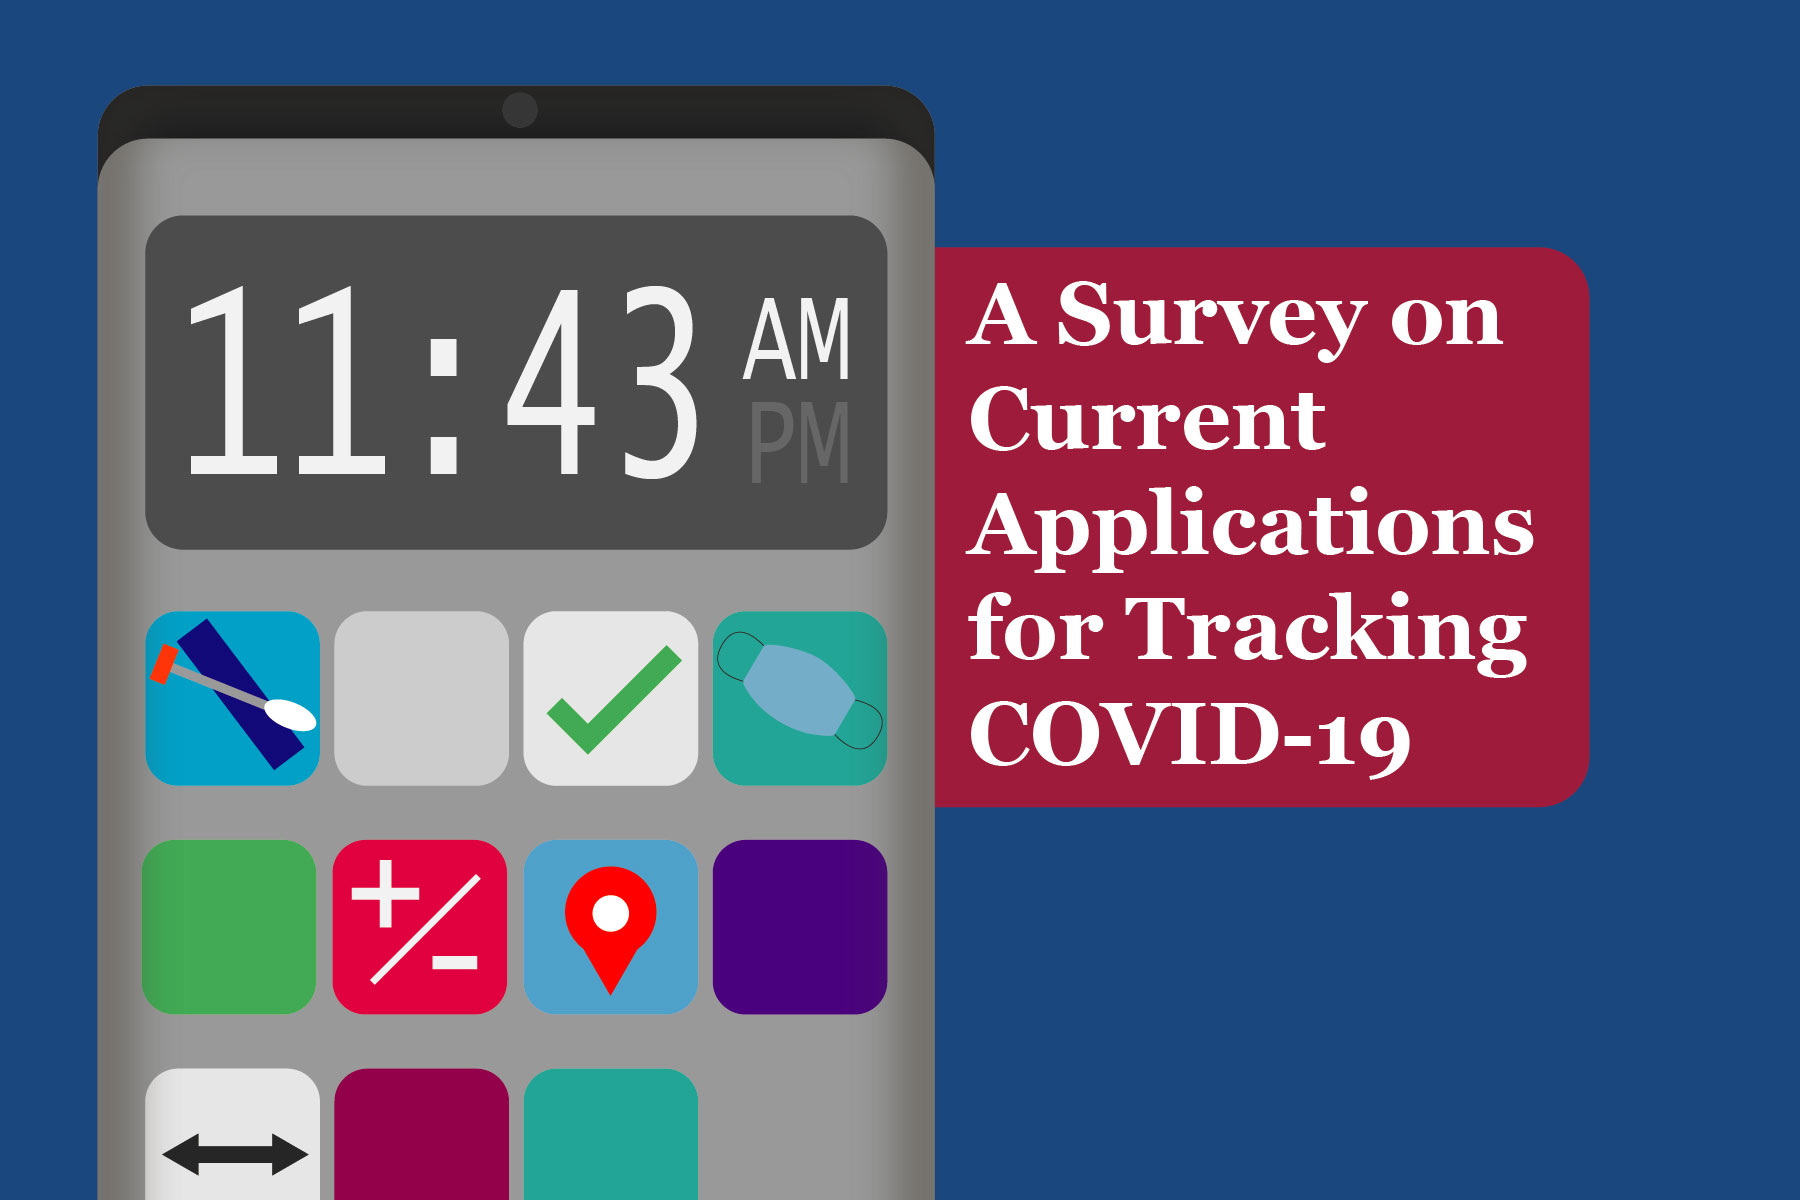 COVID-19 applications for tracking COVID-19